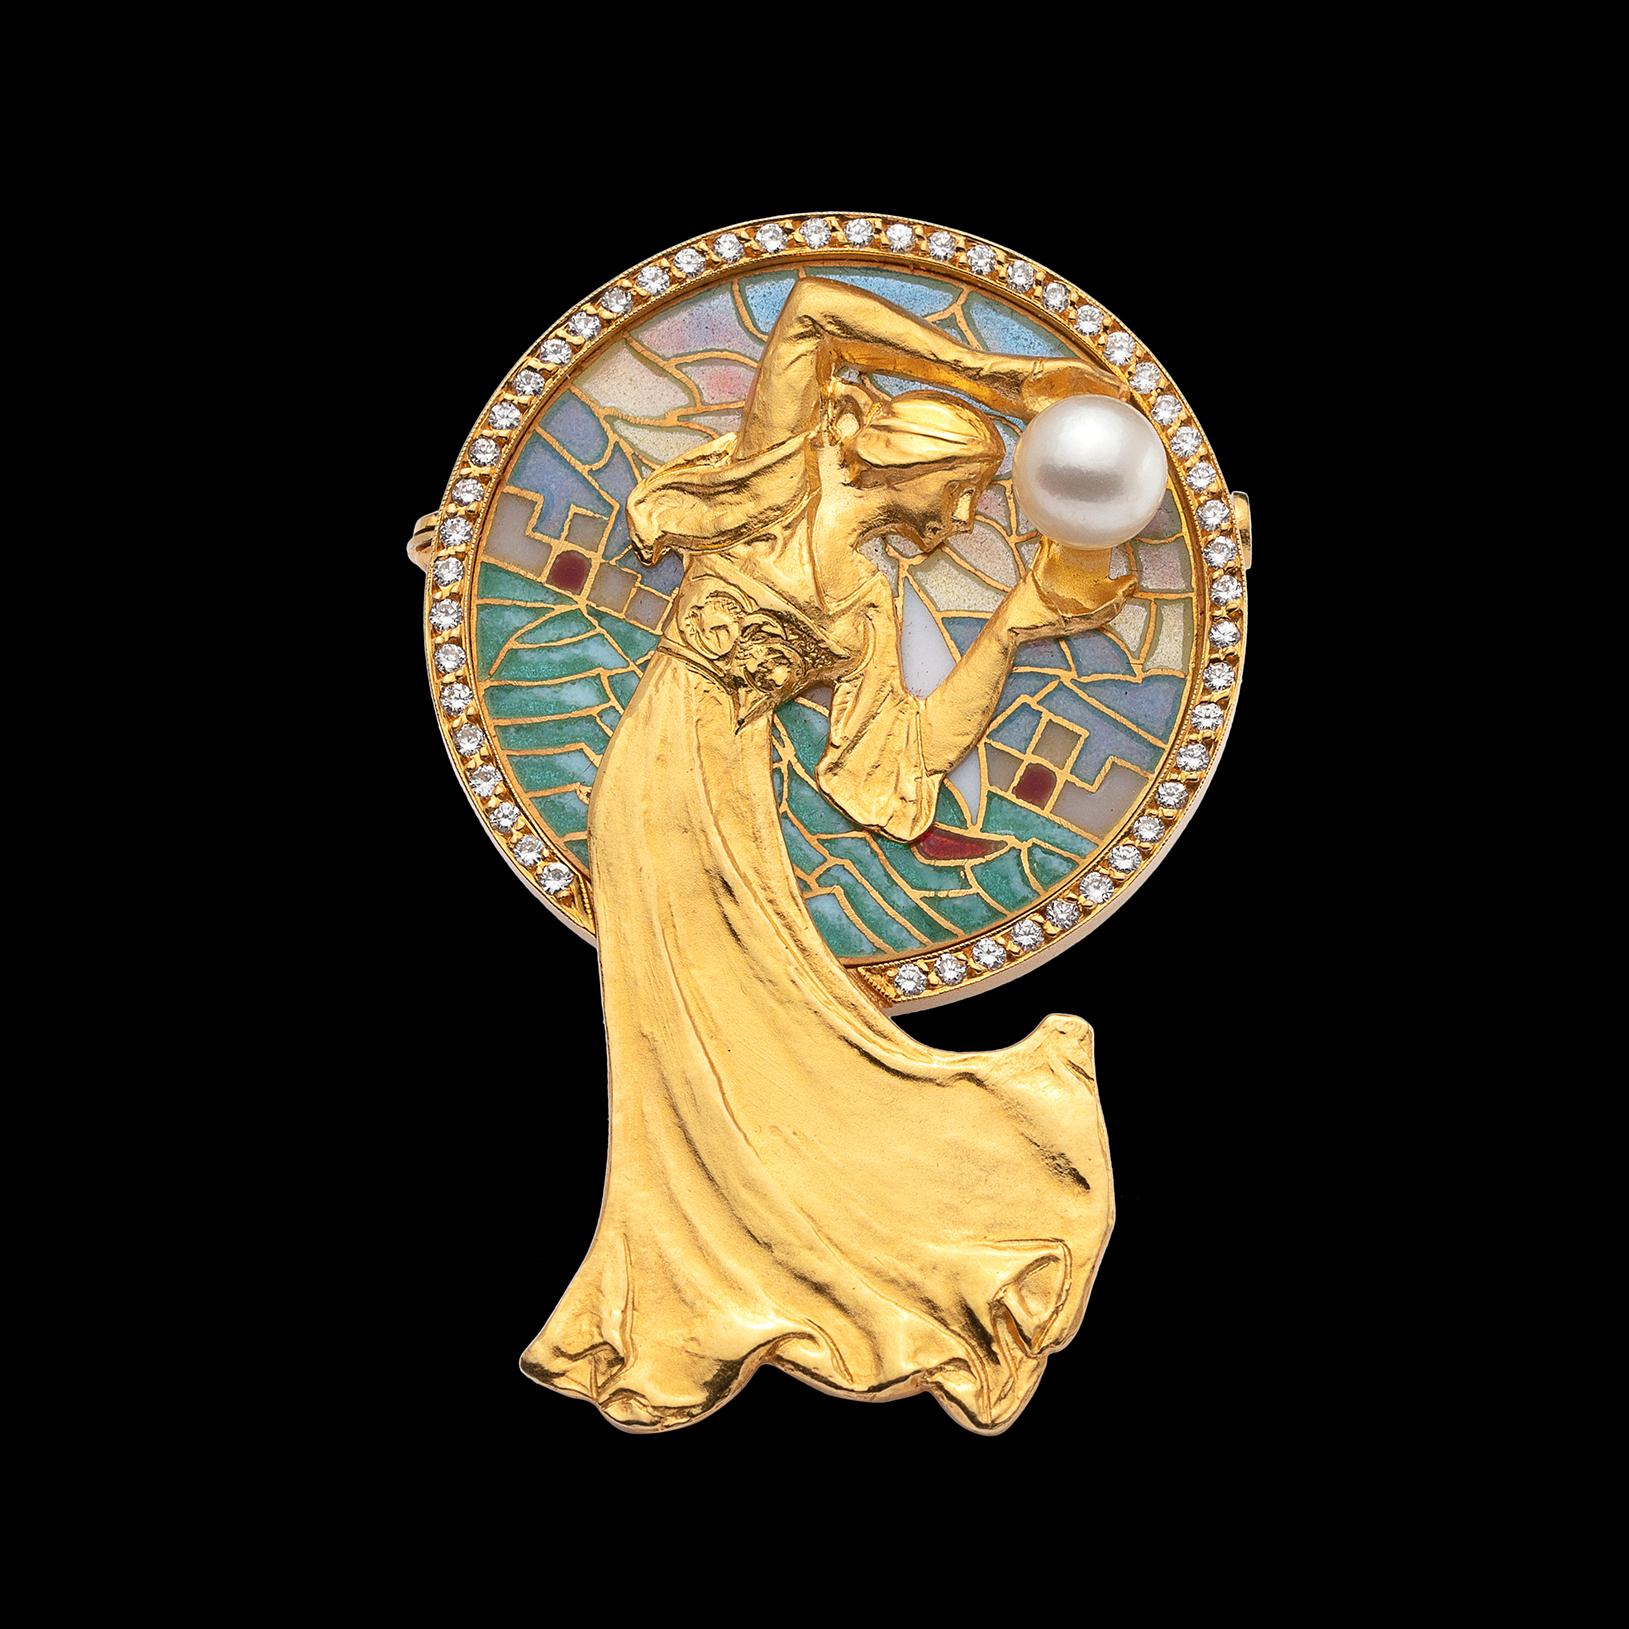 Art Nouveau styling come to life! This 18k gold brooch-pendant is designed with a seaside motif plique-a-jour enamel, complete with sailboat, sky and ocean, and round brilliant-cut diamond frame, acting as background to the female figure dressed in